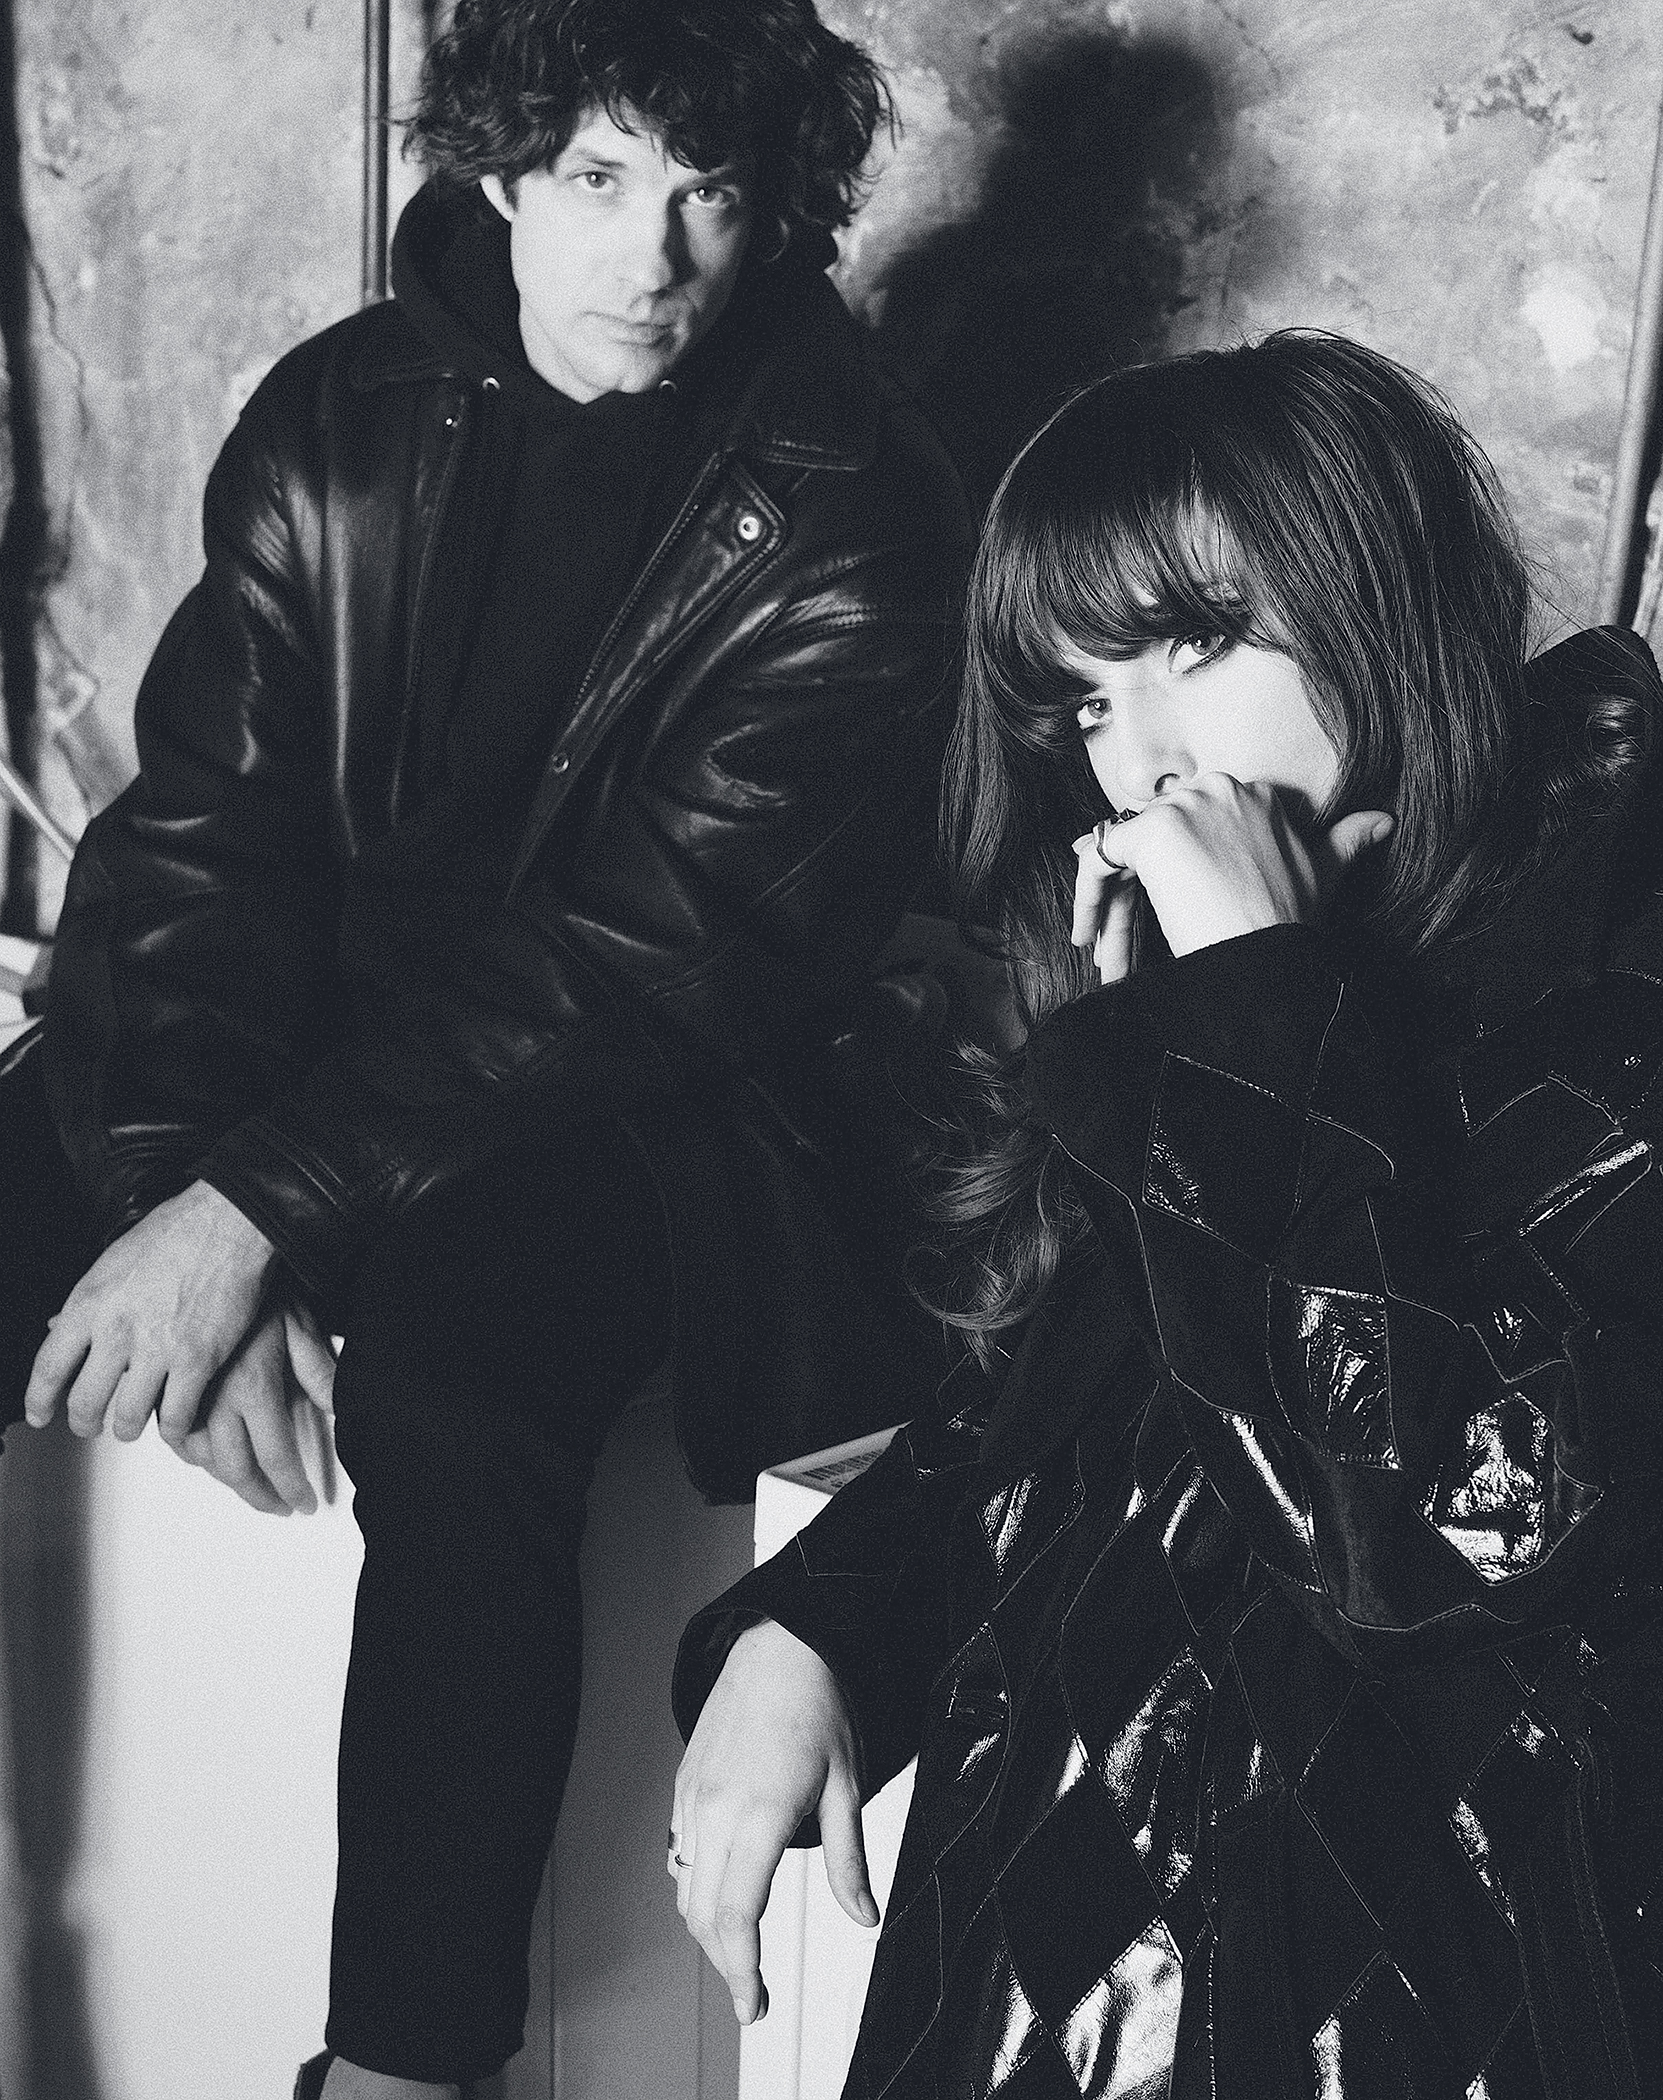 Photograph of Beach House courtesy of The Anthem.